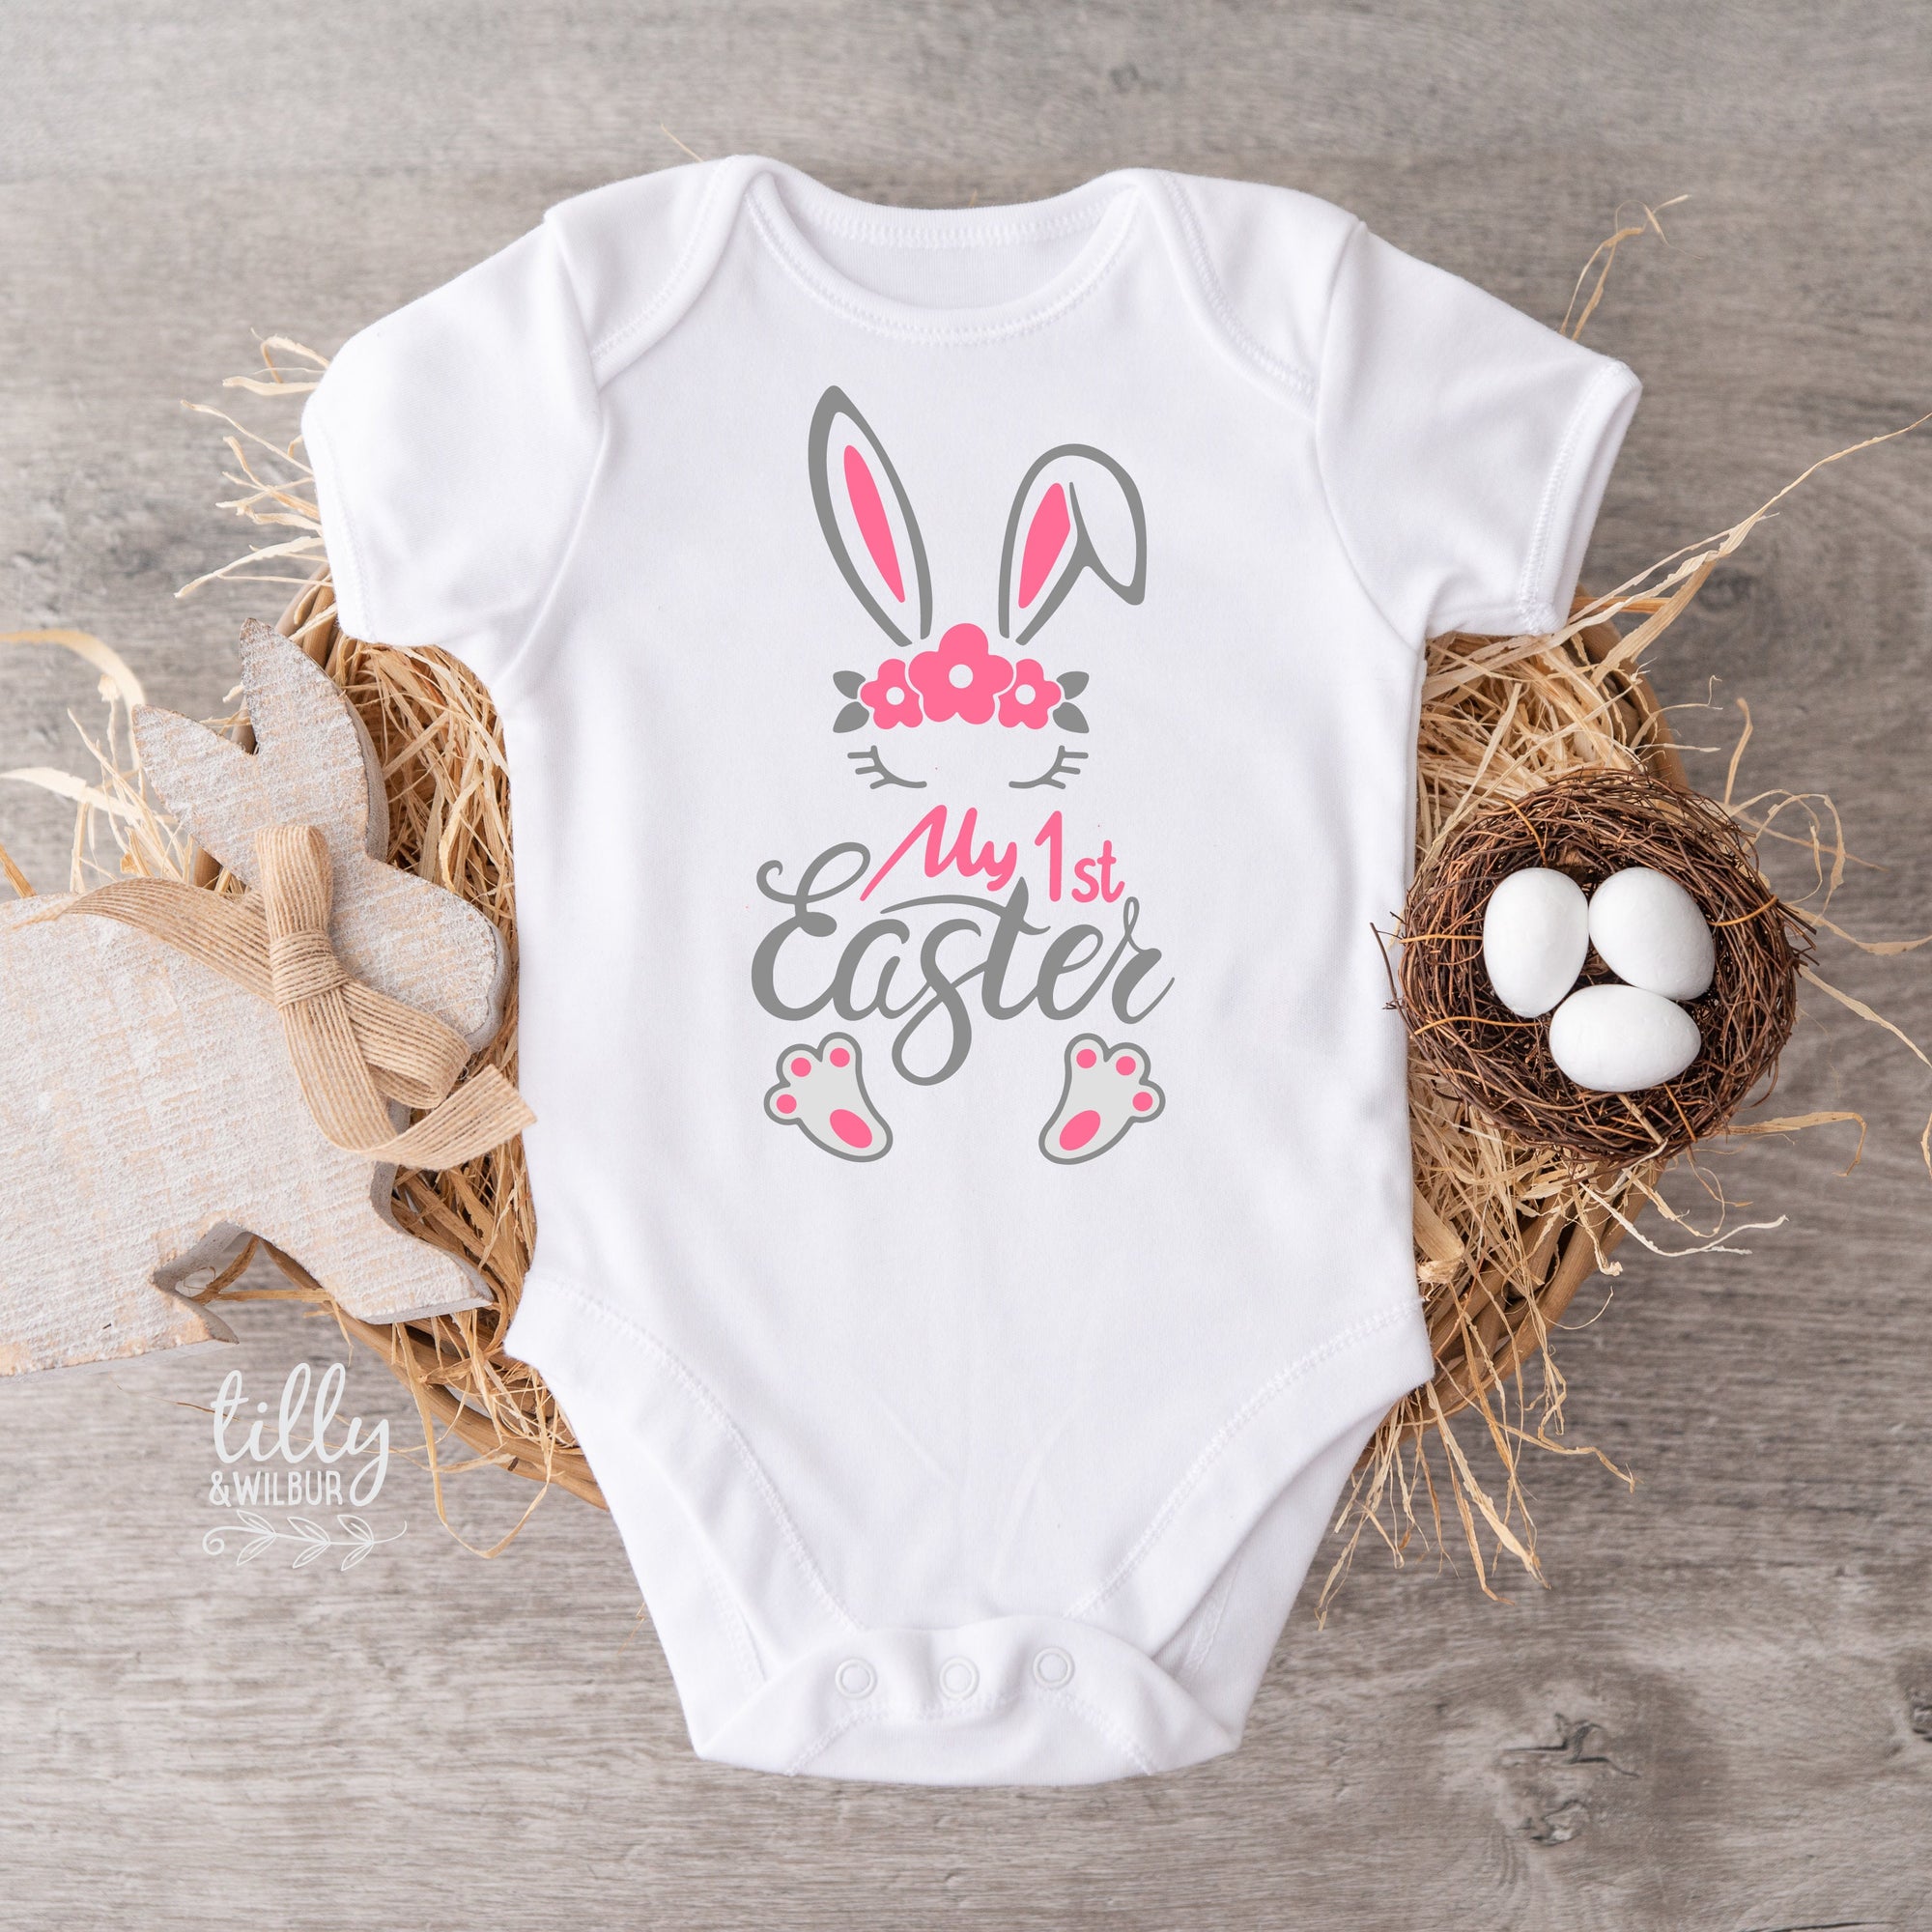 My 1st Easter Baby Bodysuit, First Easter Onesie, Newborn Easter Gift, 1st Easter Outfit, Baby's 1st Easter Bodysuit, Bunny Rabbit Onesie